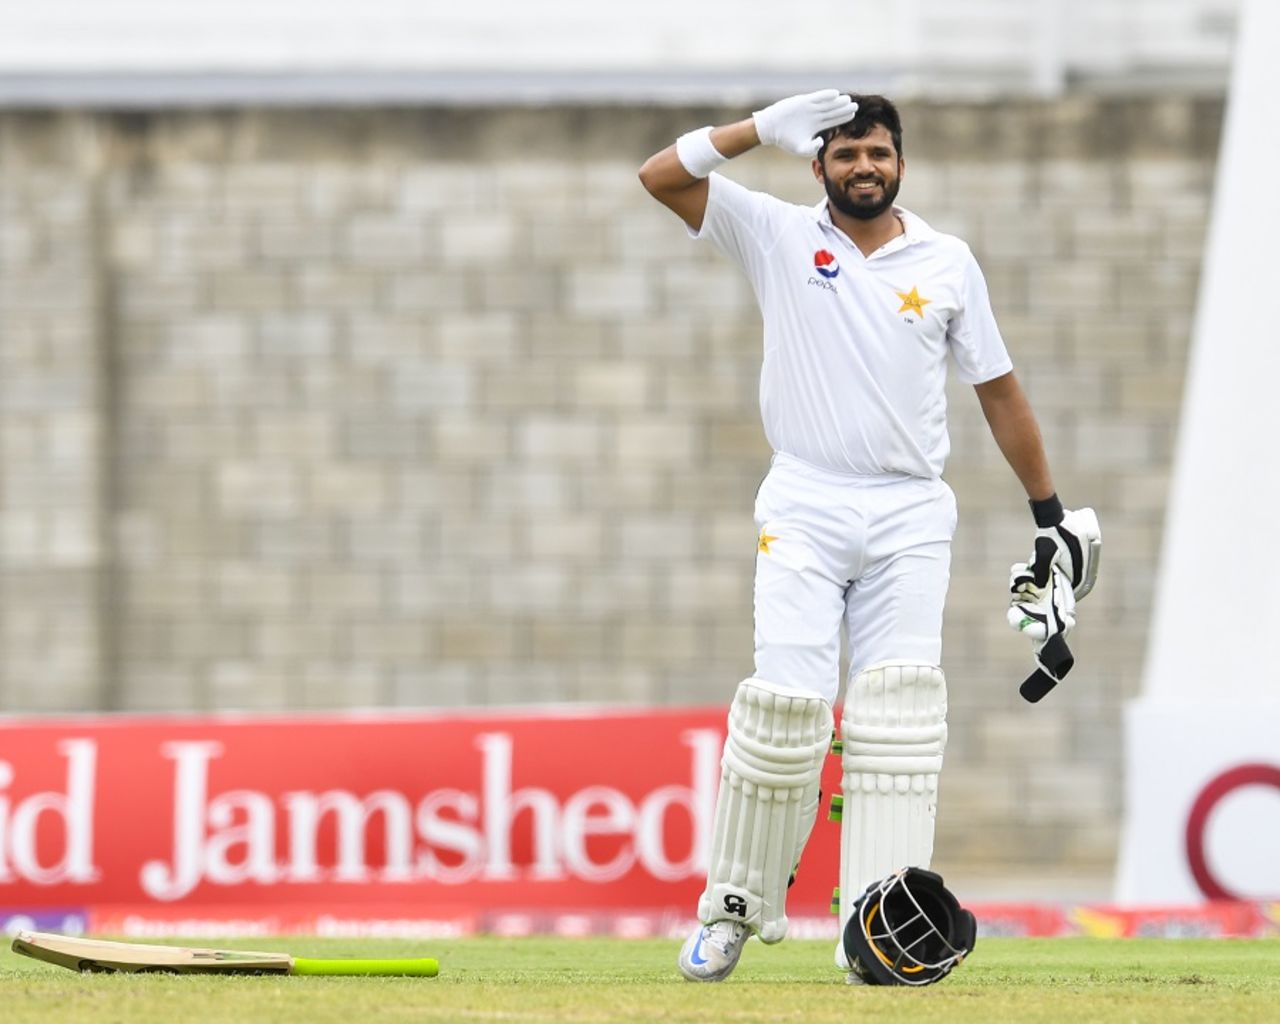 Azhar Ali brings out the salute, West Indies v Pakistan, 2nd Test, Bridgetown, 3rd day, May 2, 2017